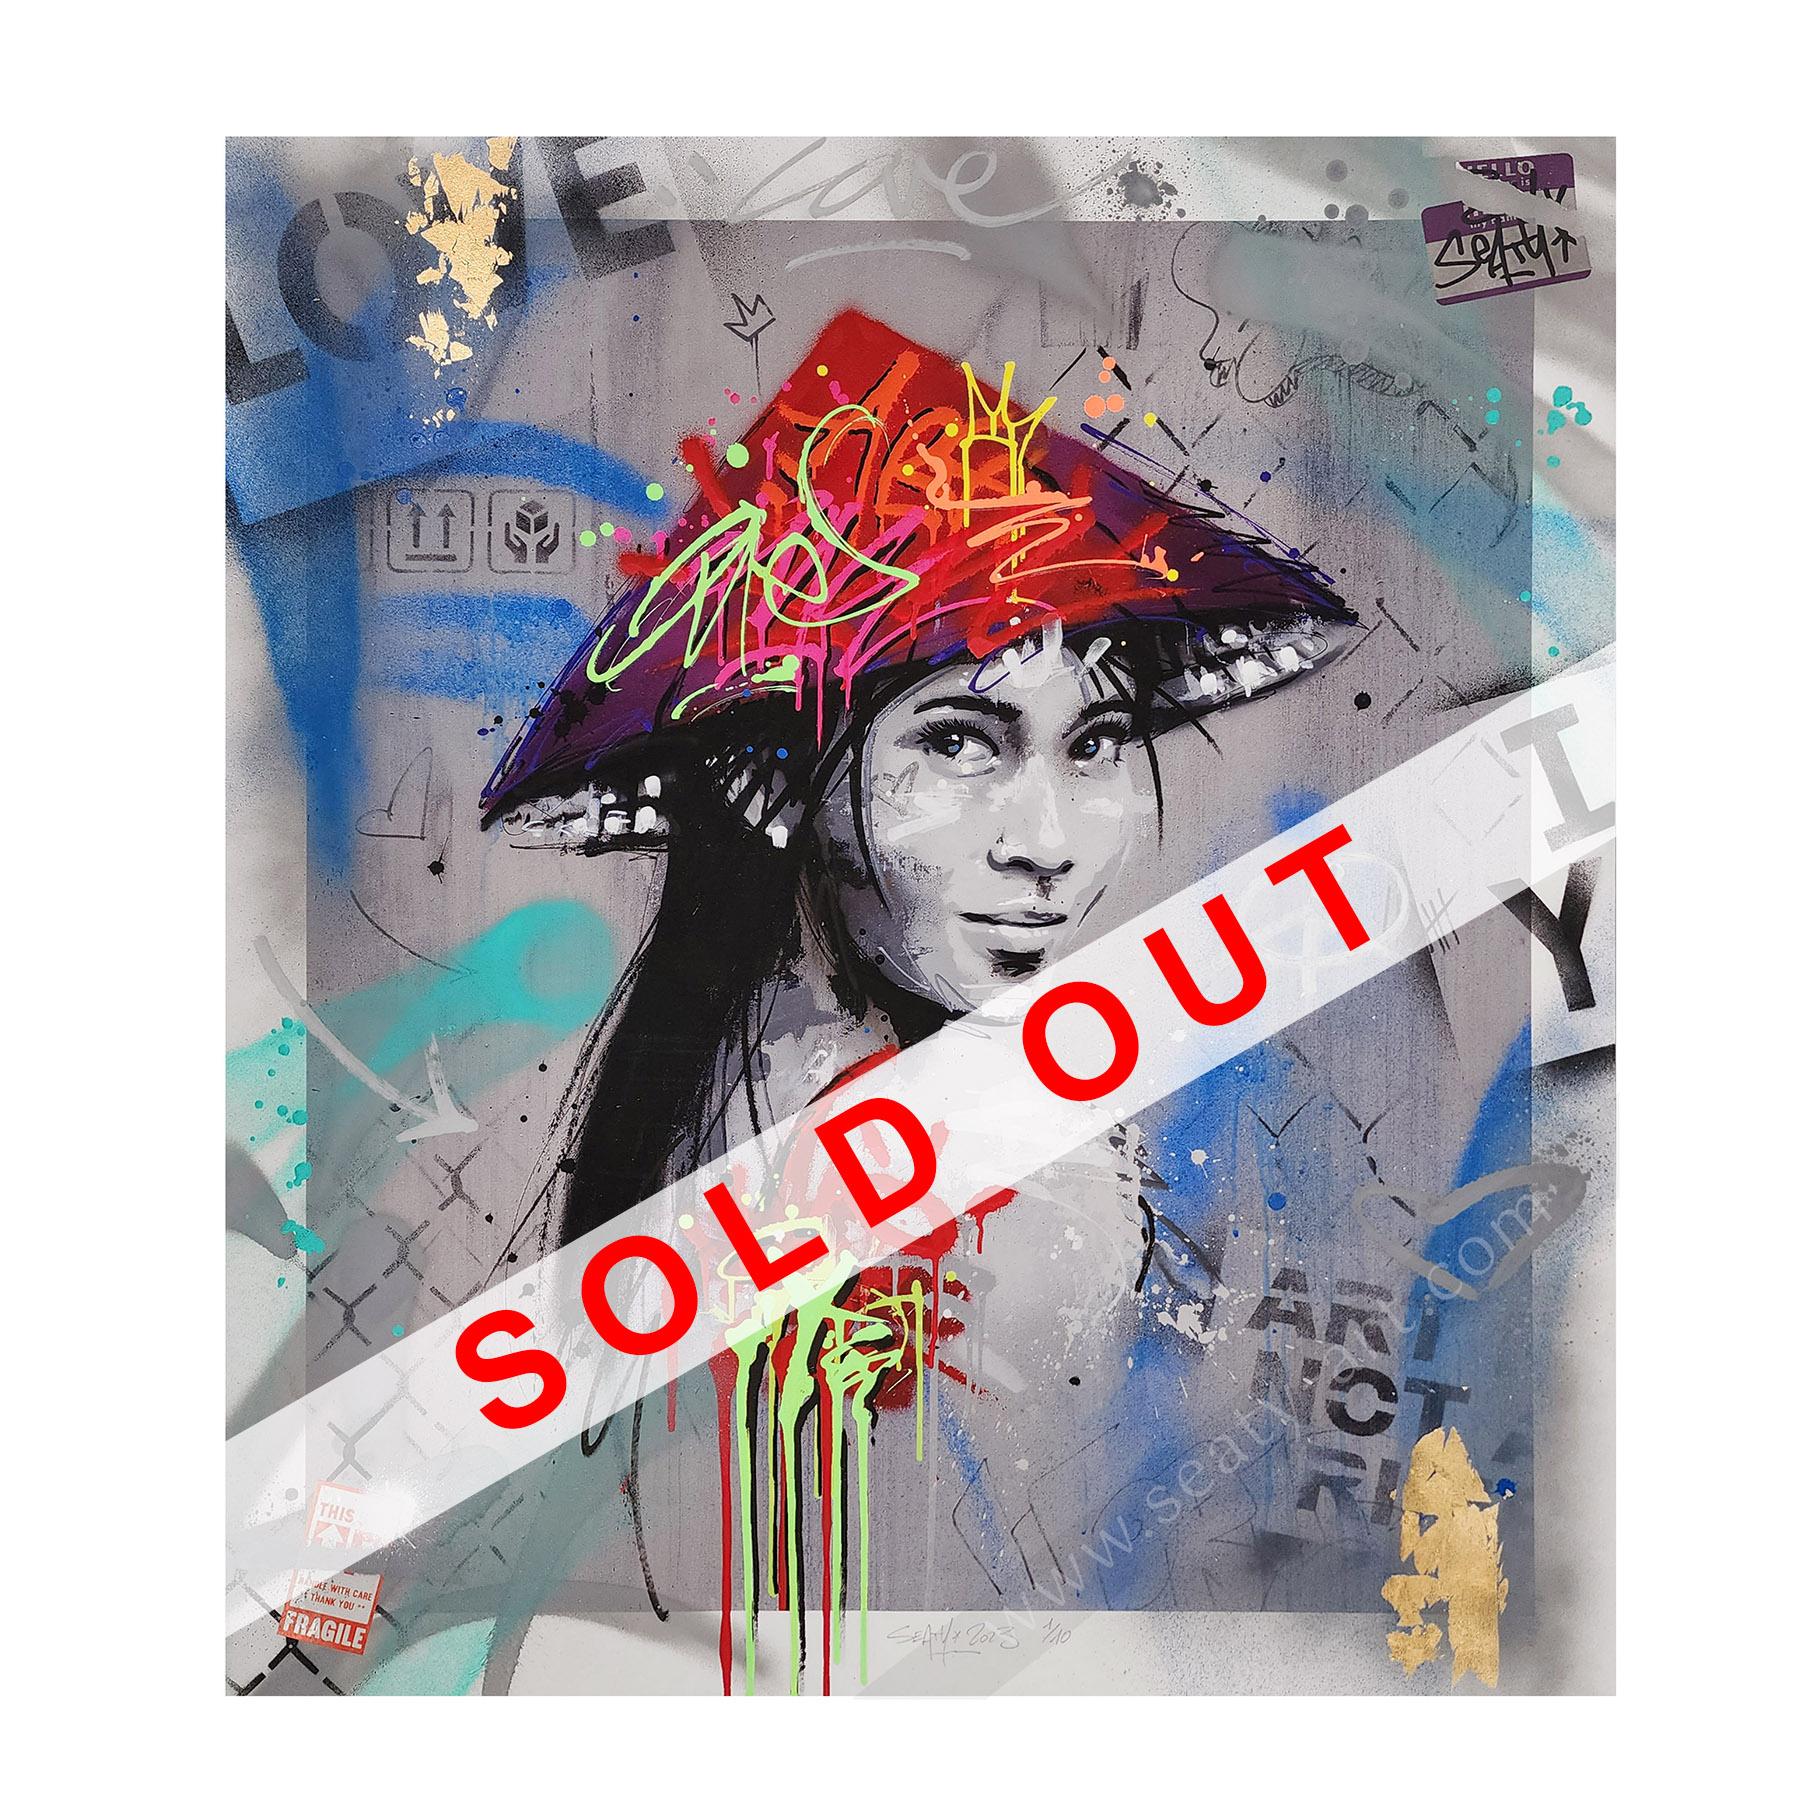 Sold out site 21